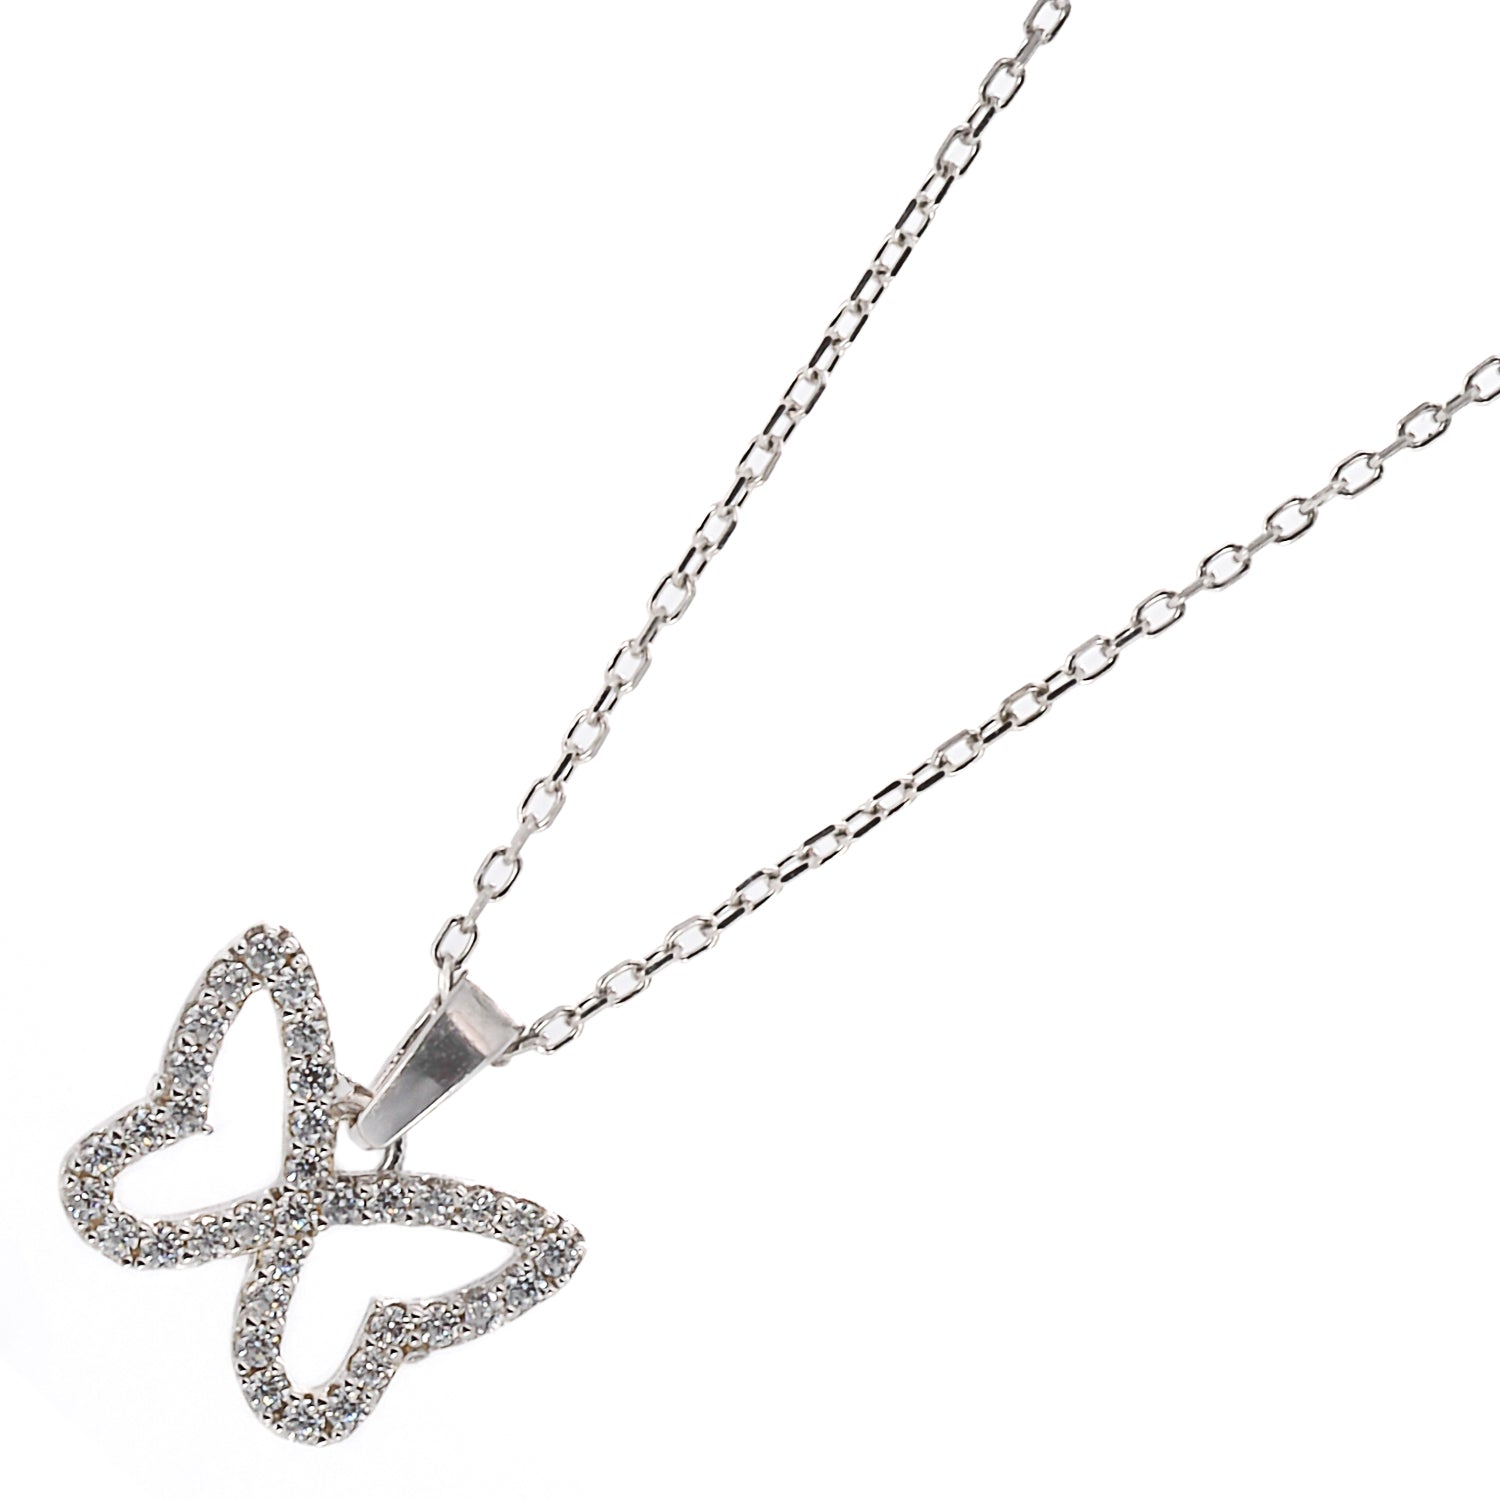 The Silver Sparkly Butterfly Necklace, a harmonious blend of elegance and grace.